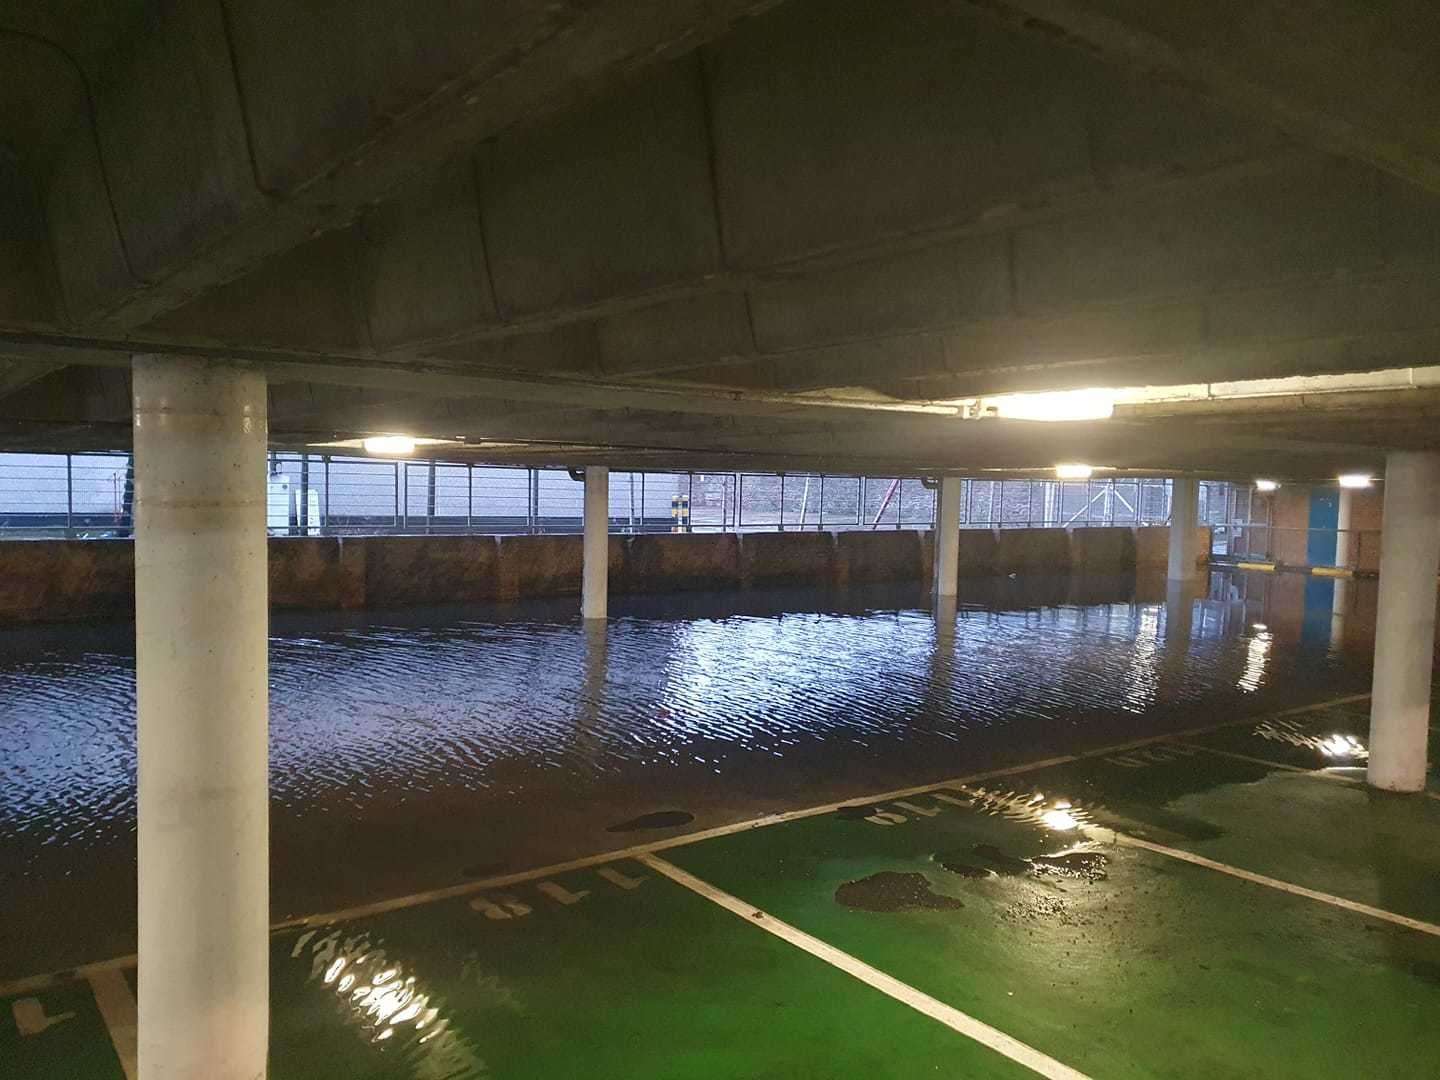 Rose Street car park had its share of flooding. Photo: Angel Ina